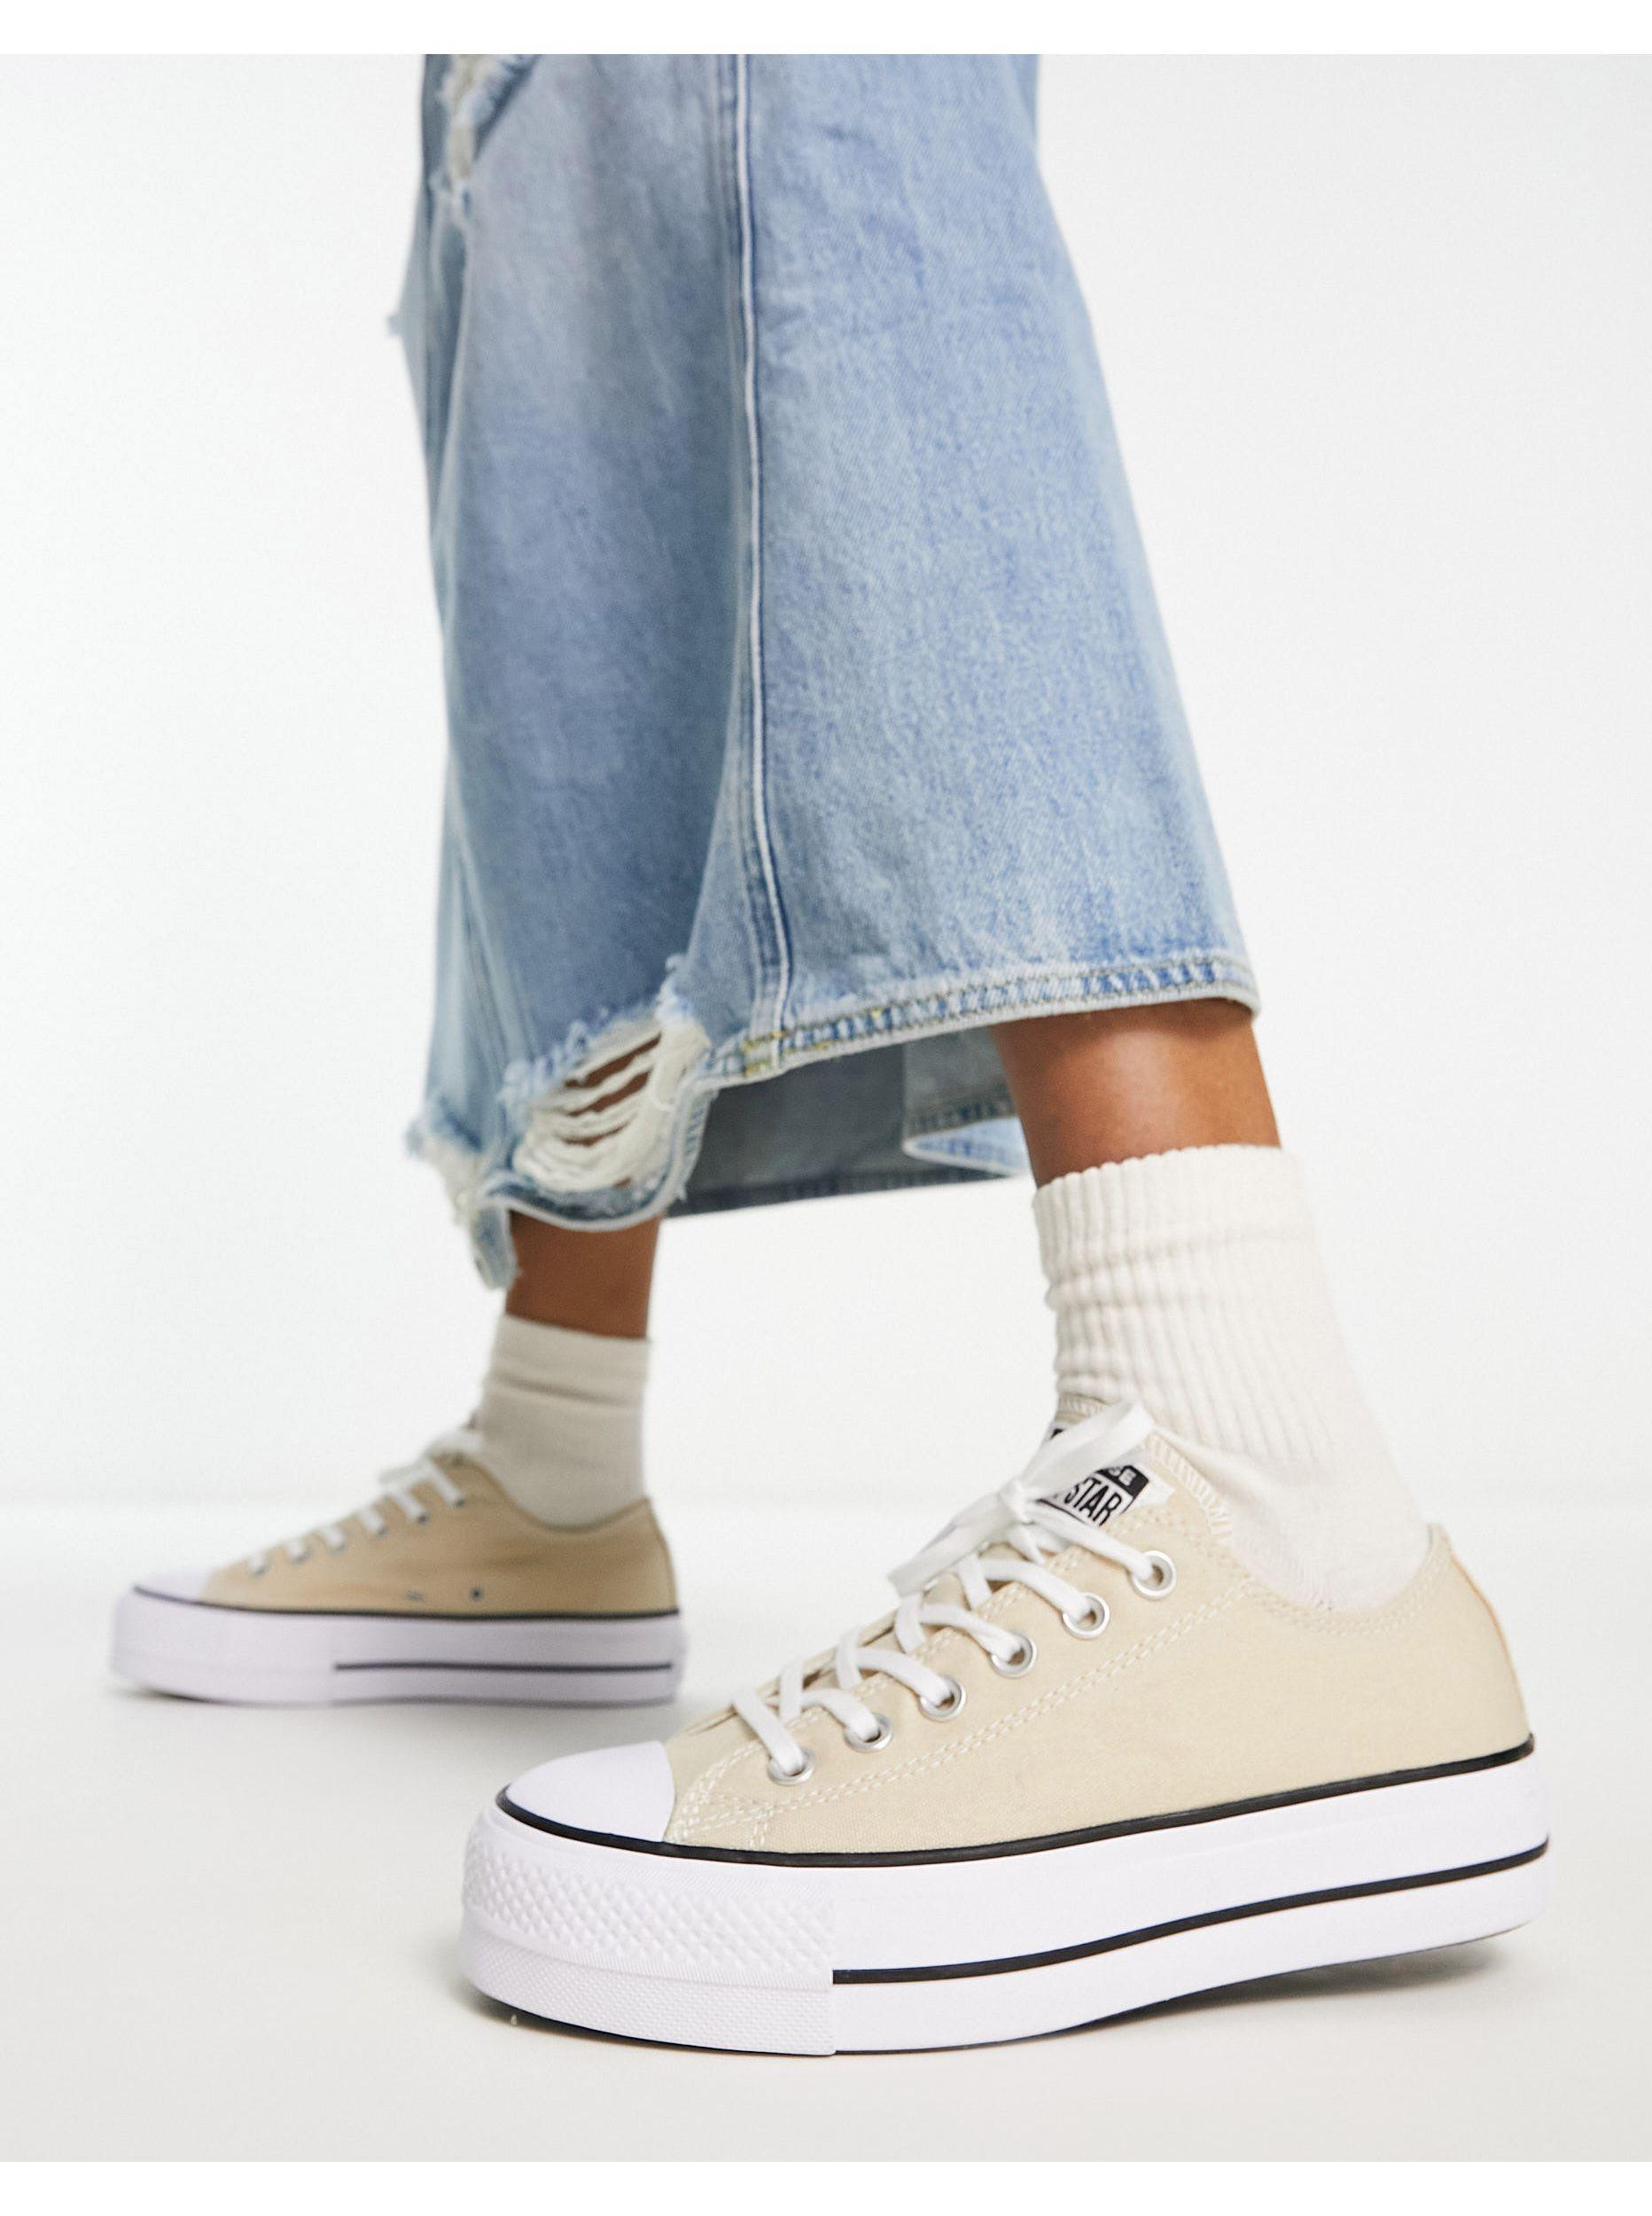 Converse Chuck Taylor All Star Lift Ox Platform Sneakers in Blue | Lyst